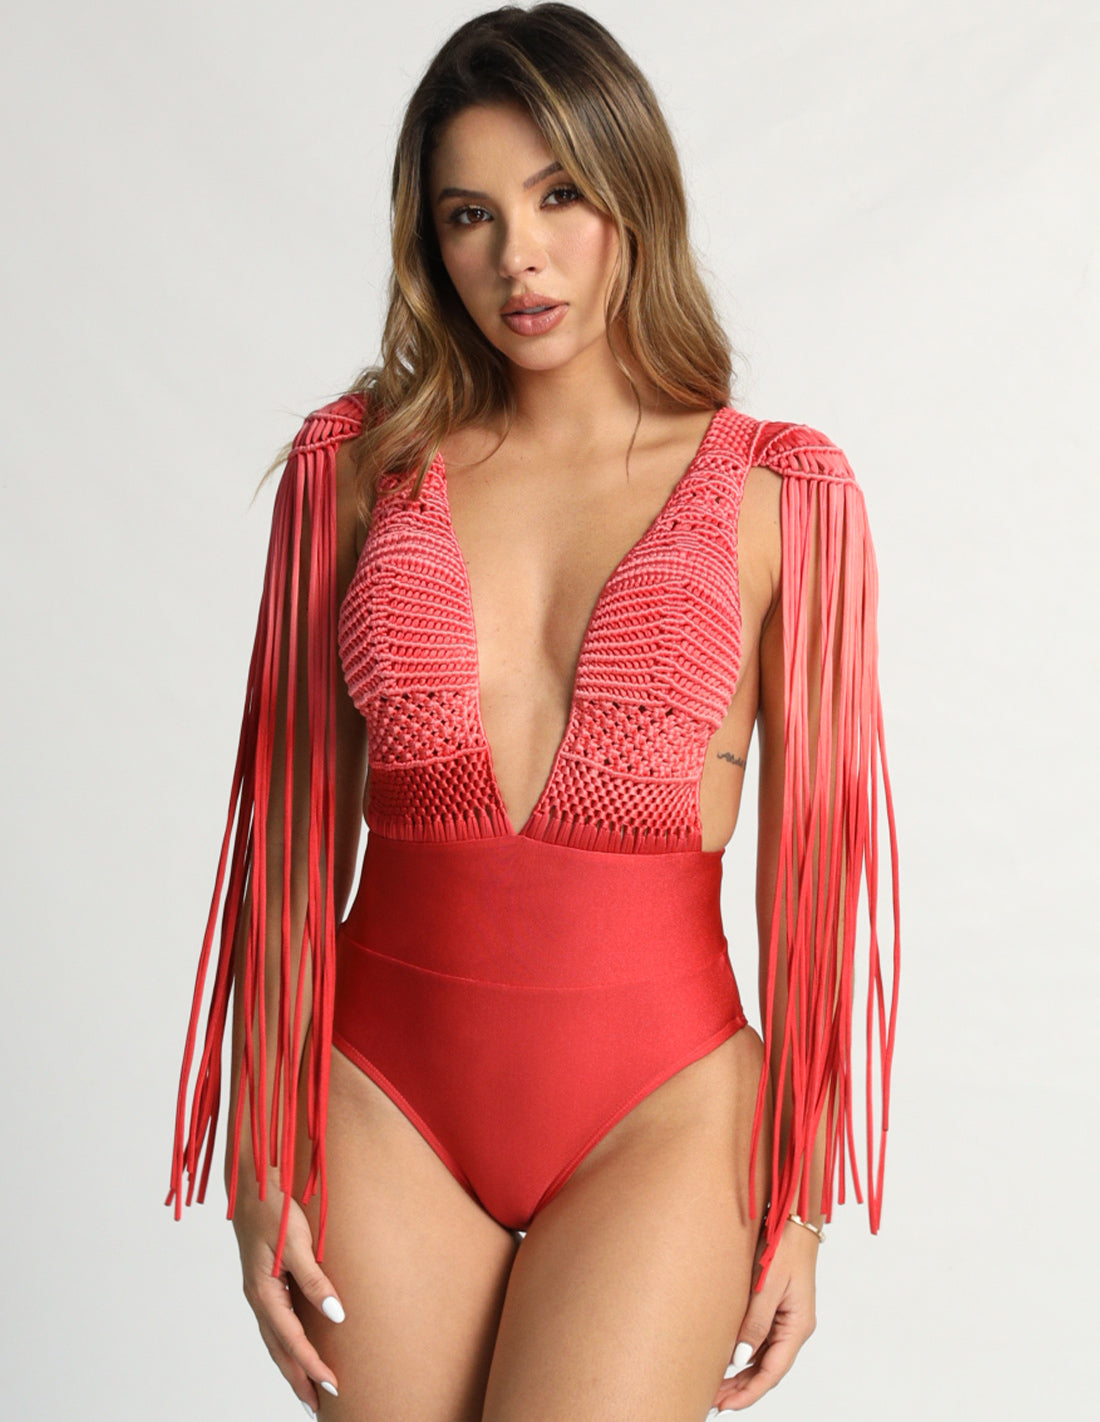 Pendente One-Piece Faded Tomatoe. Hand-Dyed One-Piece Swimsuit With Hand Woven Macramé In Faded Tomatoe. Entreaguas